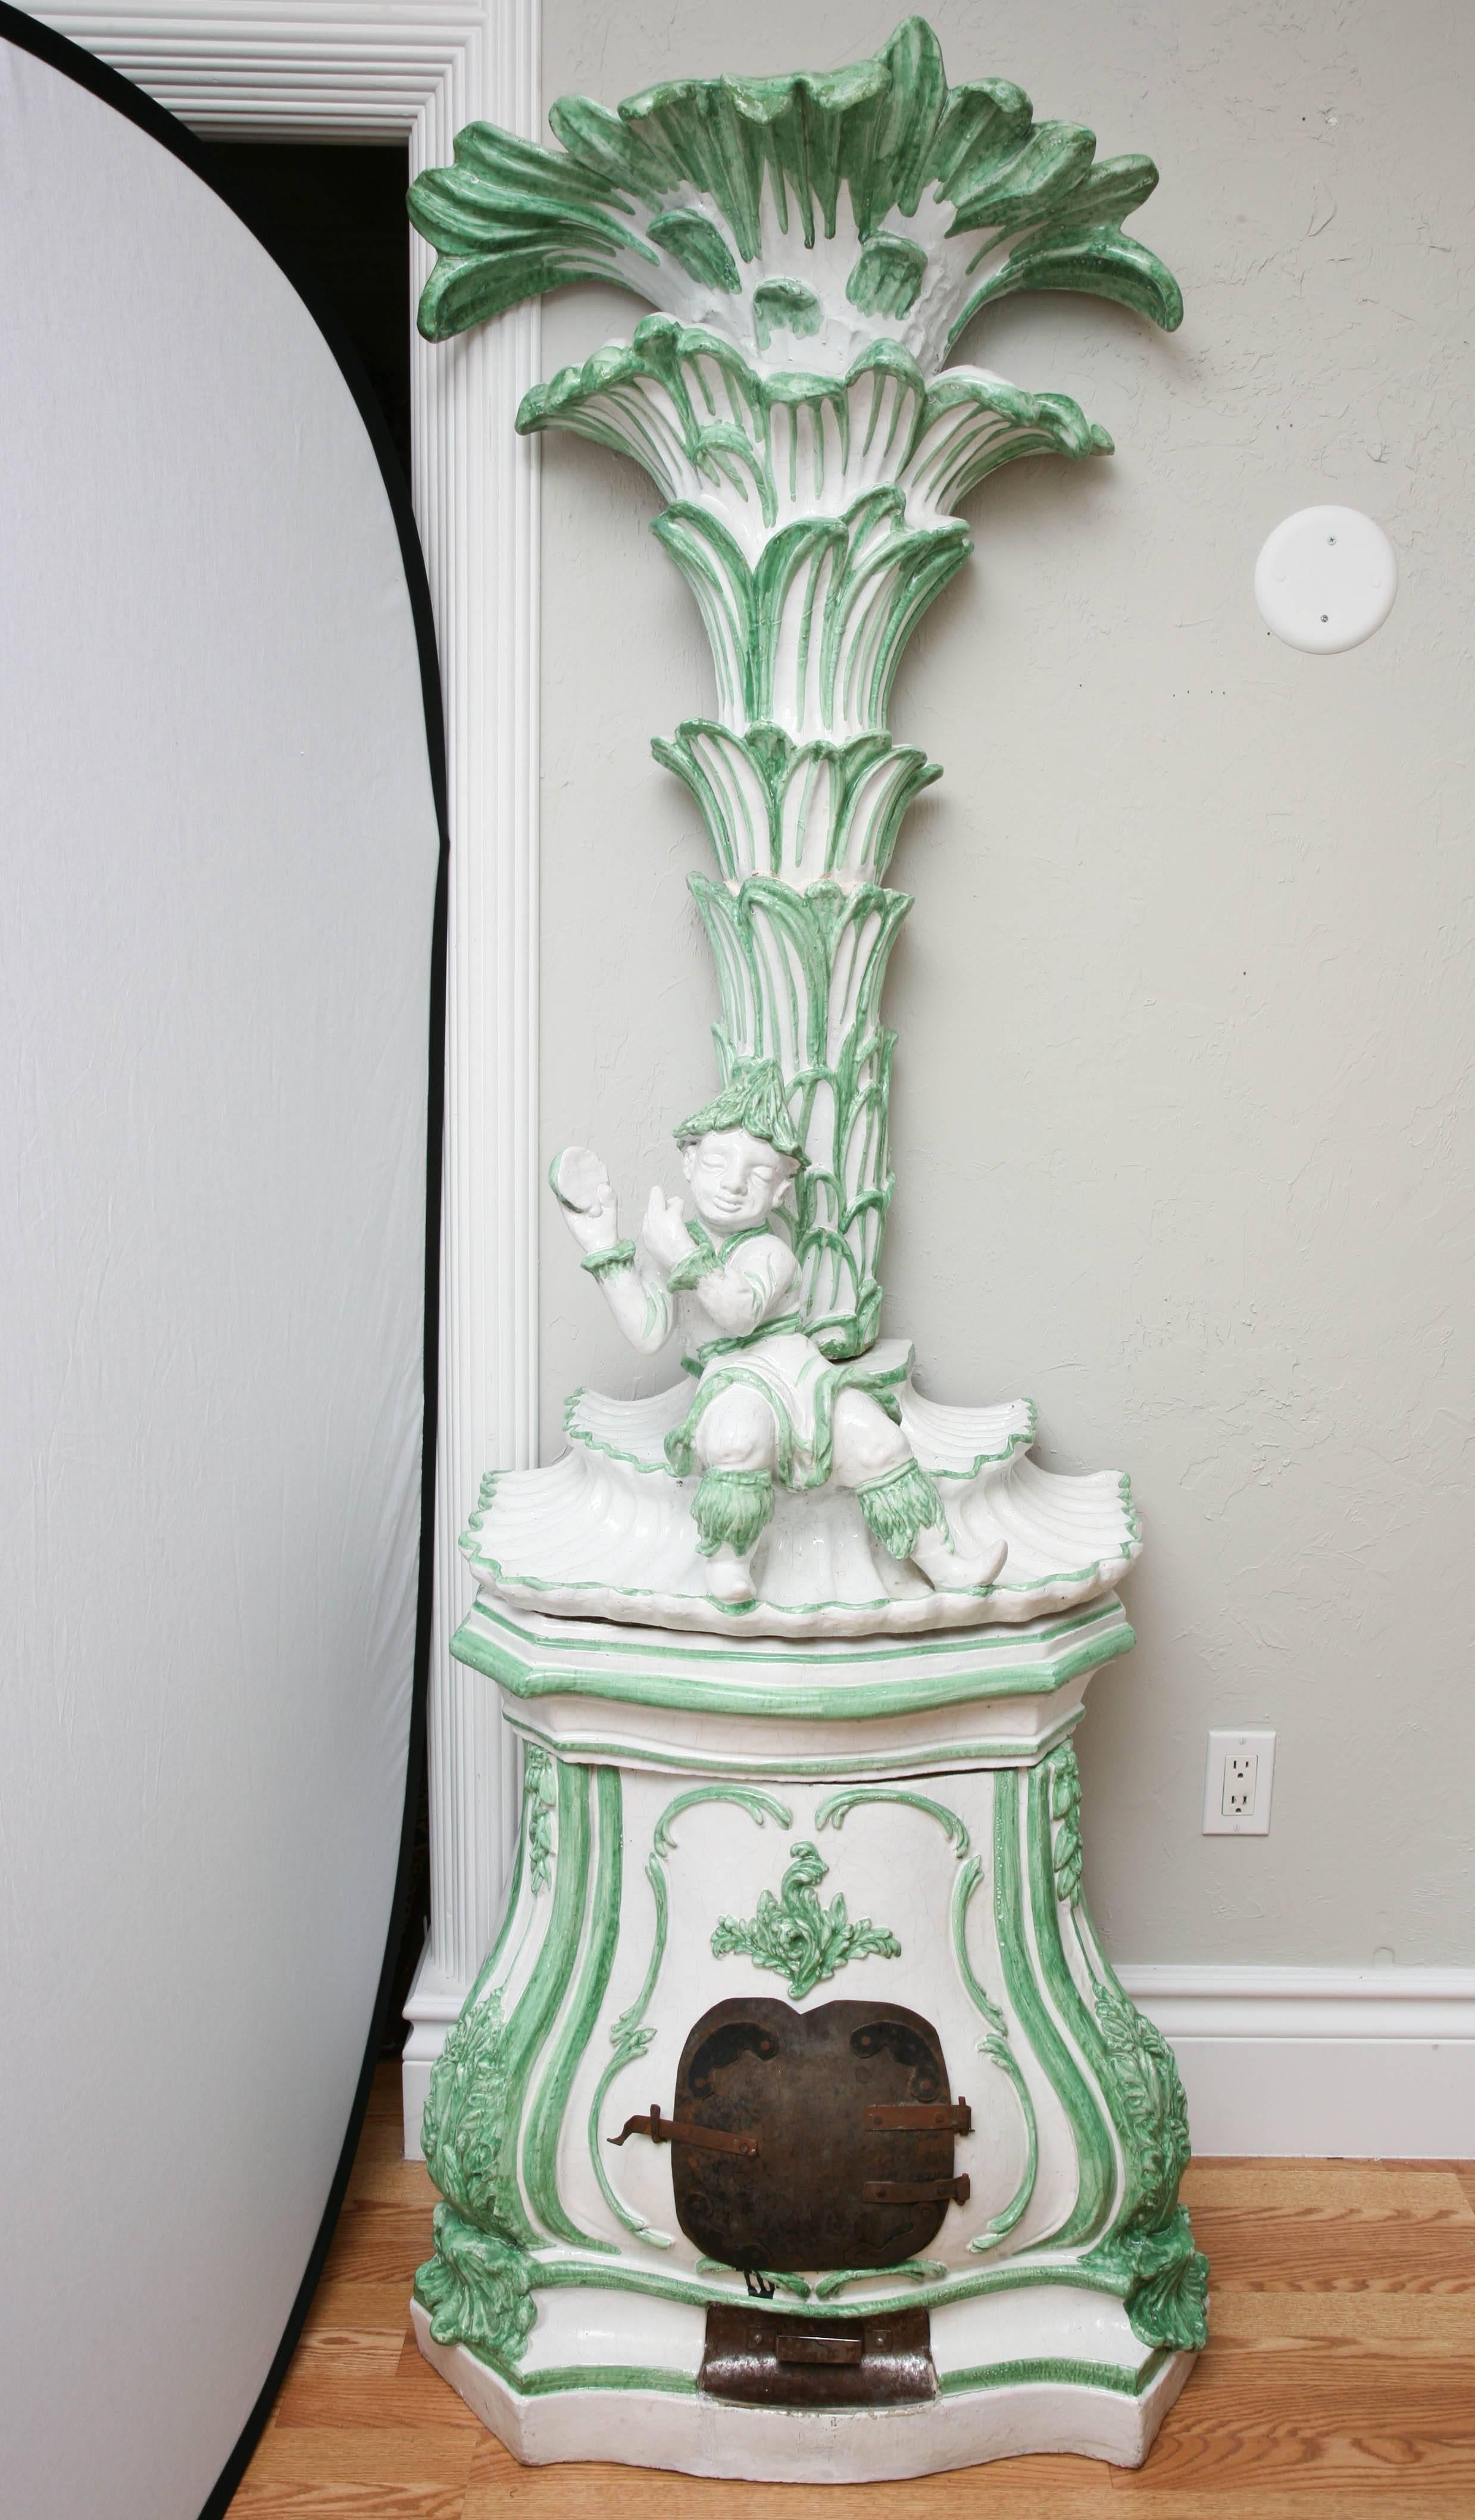 Striking and unique Chinoiserie terra cotta stove in beautiful shade of green and white.